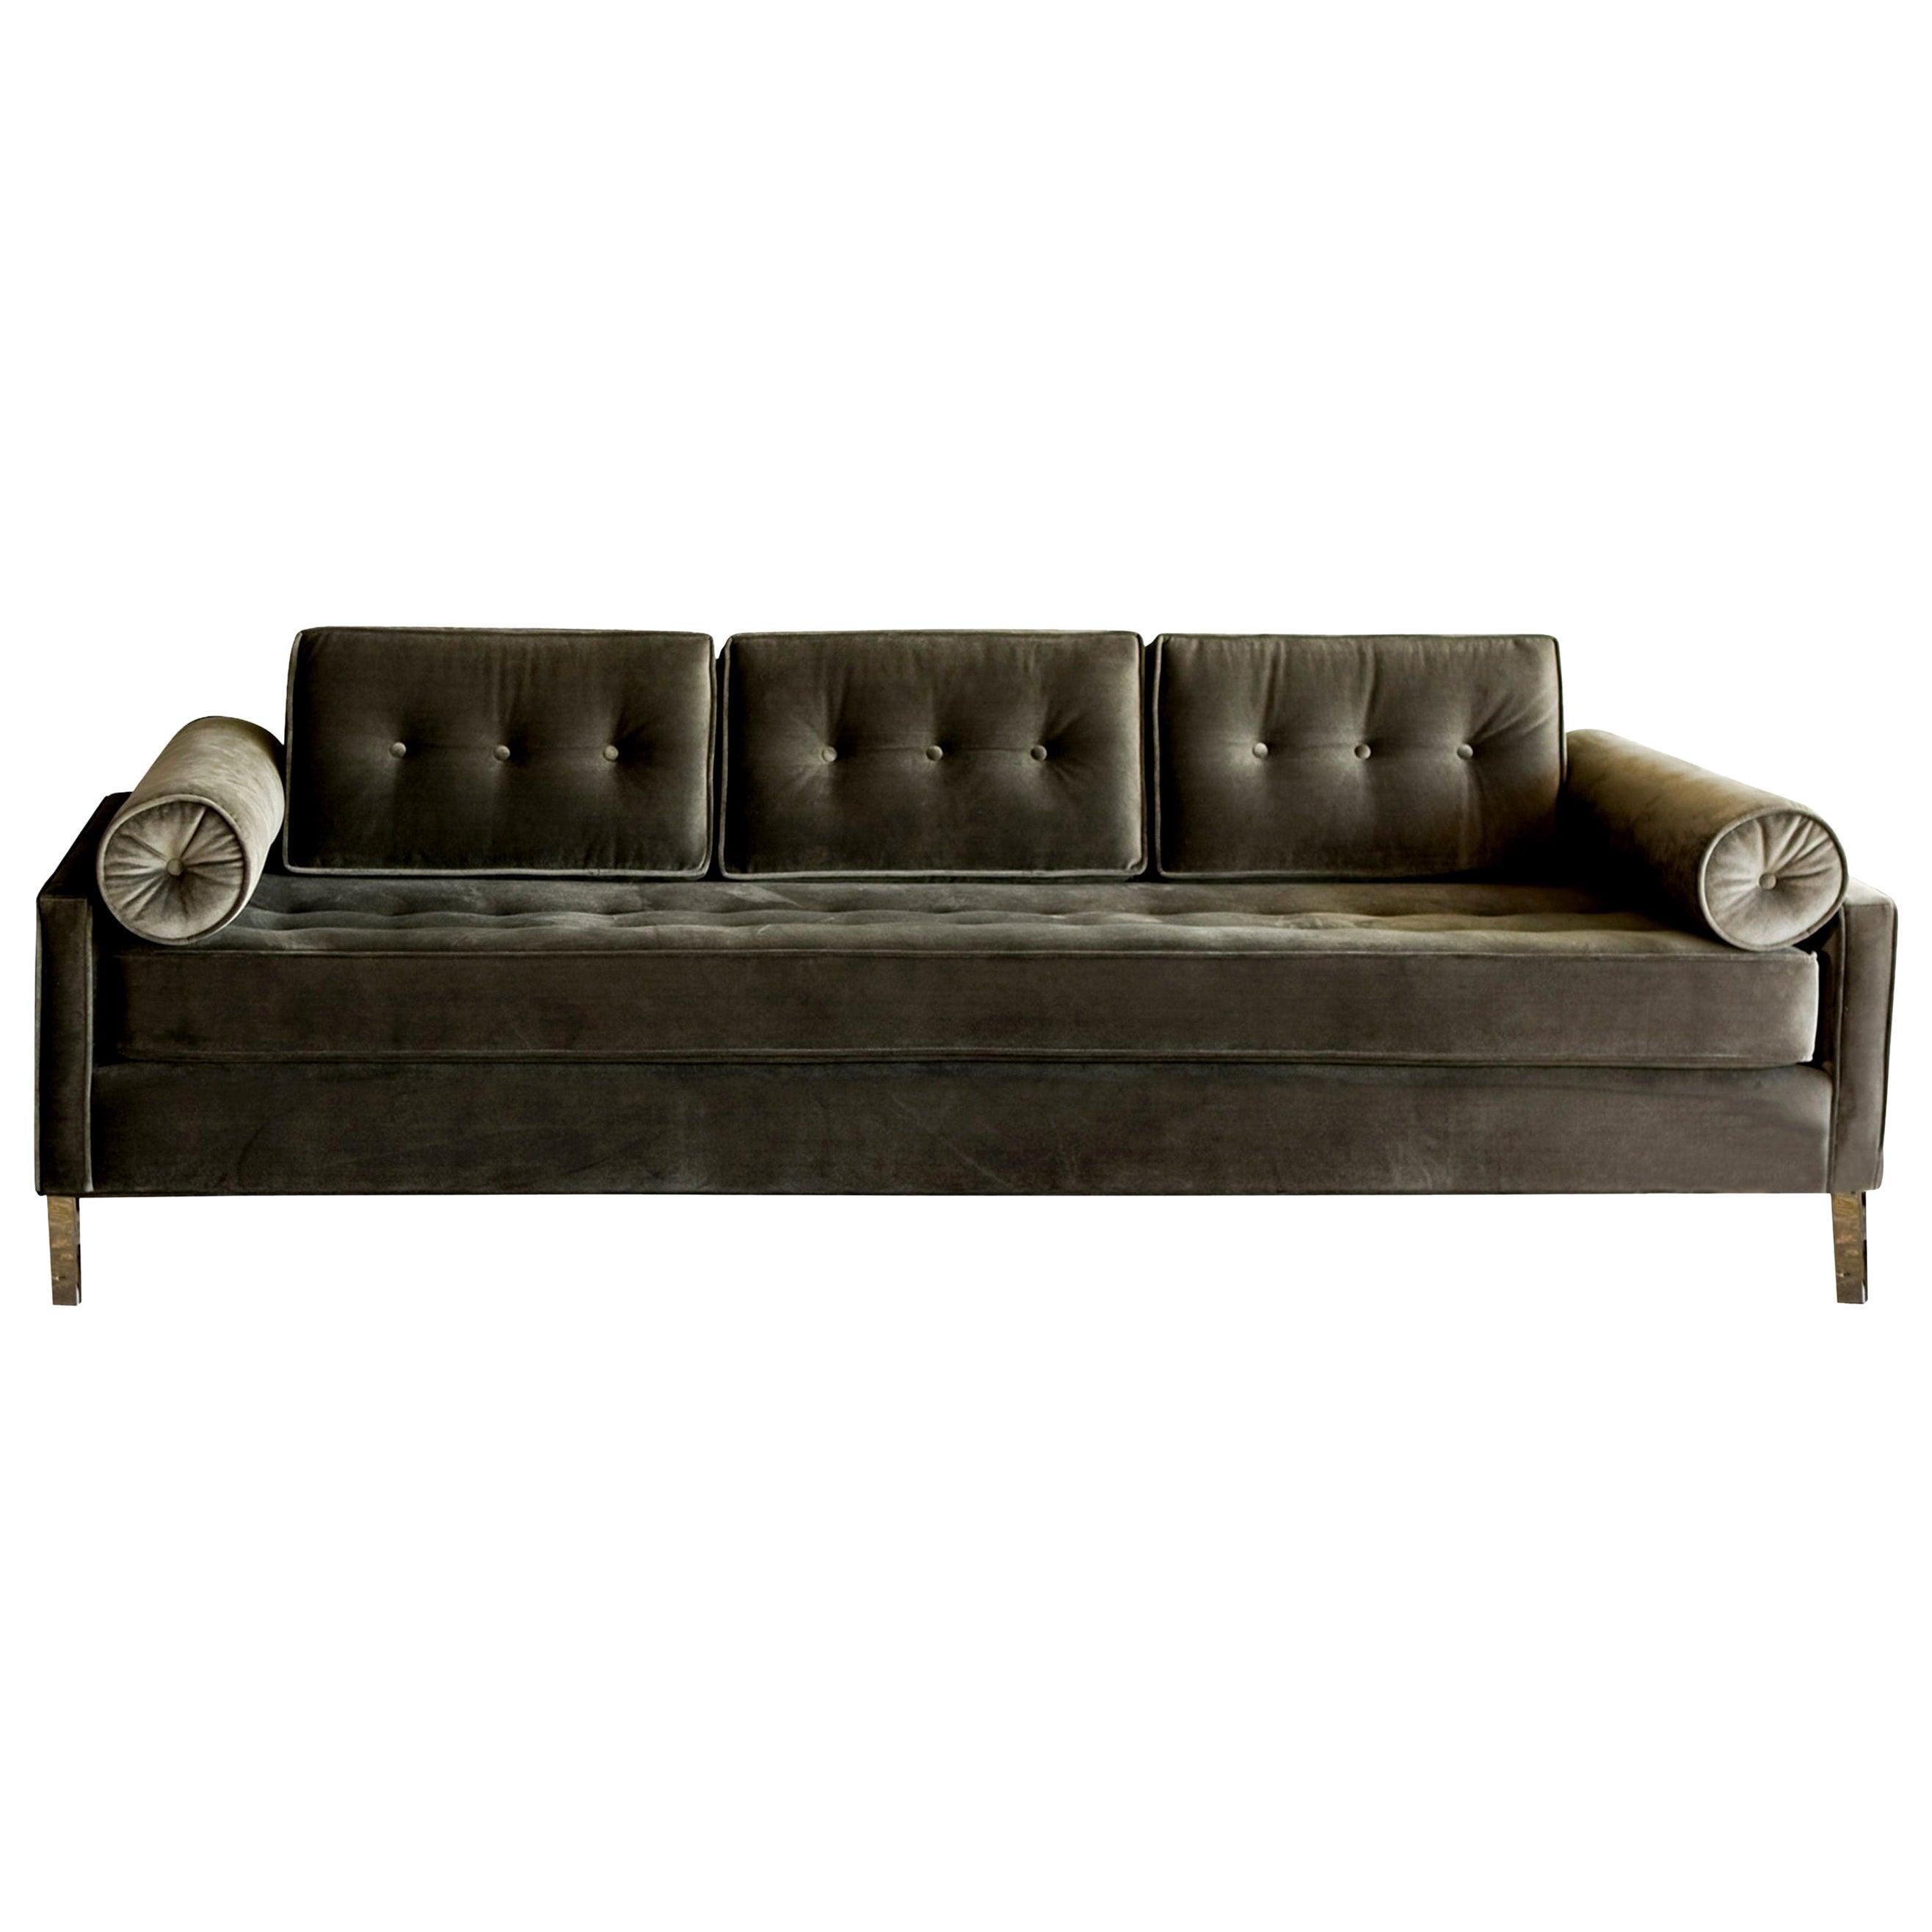 Sleek and stylized the case #1 sofa is streamlined and comfortable. Upholstered in a high-end durable pewter colored velvet.

The sofa can be customized to your liking with plenty of fabric colors and options to choose from.

It can also be